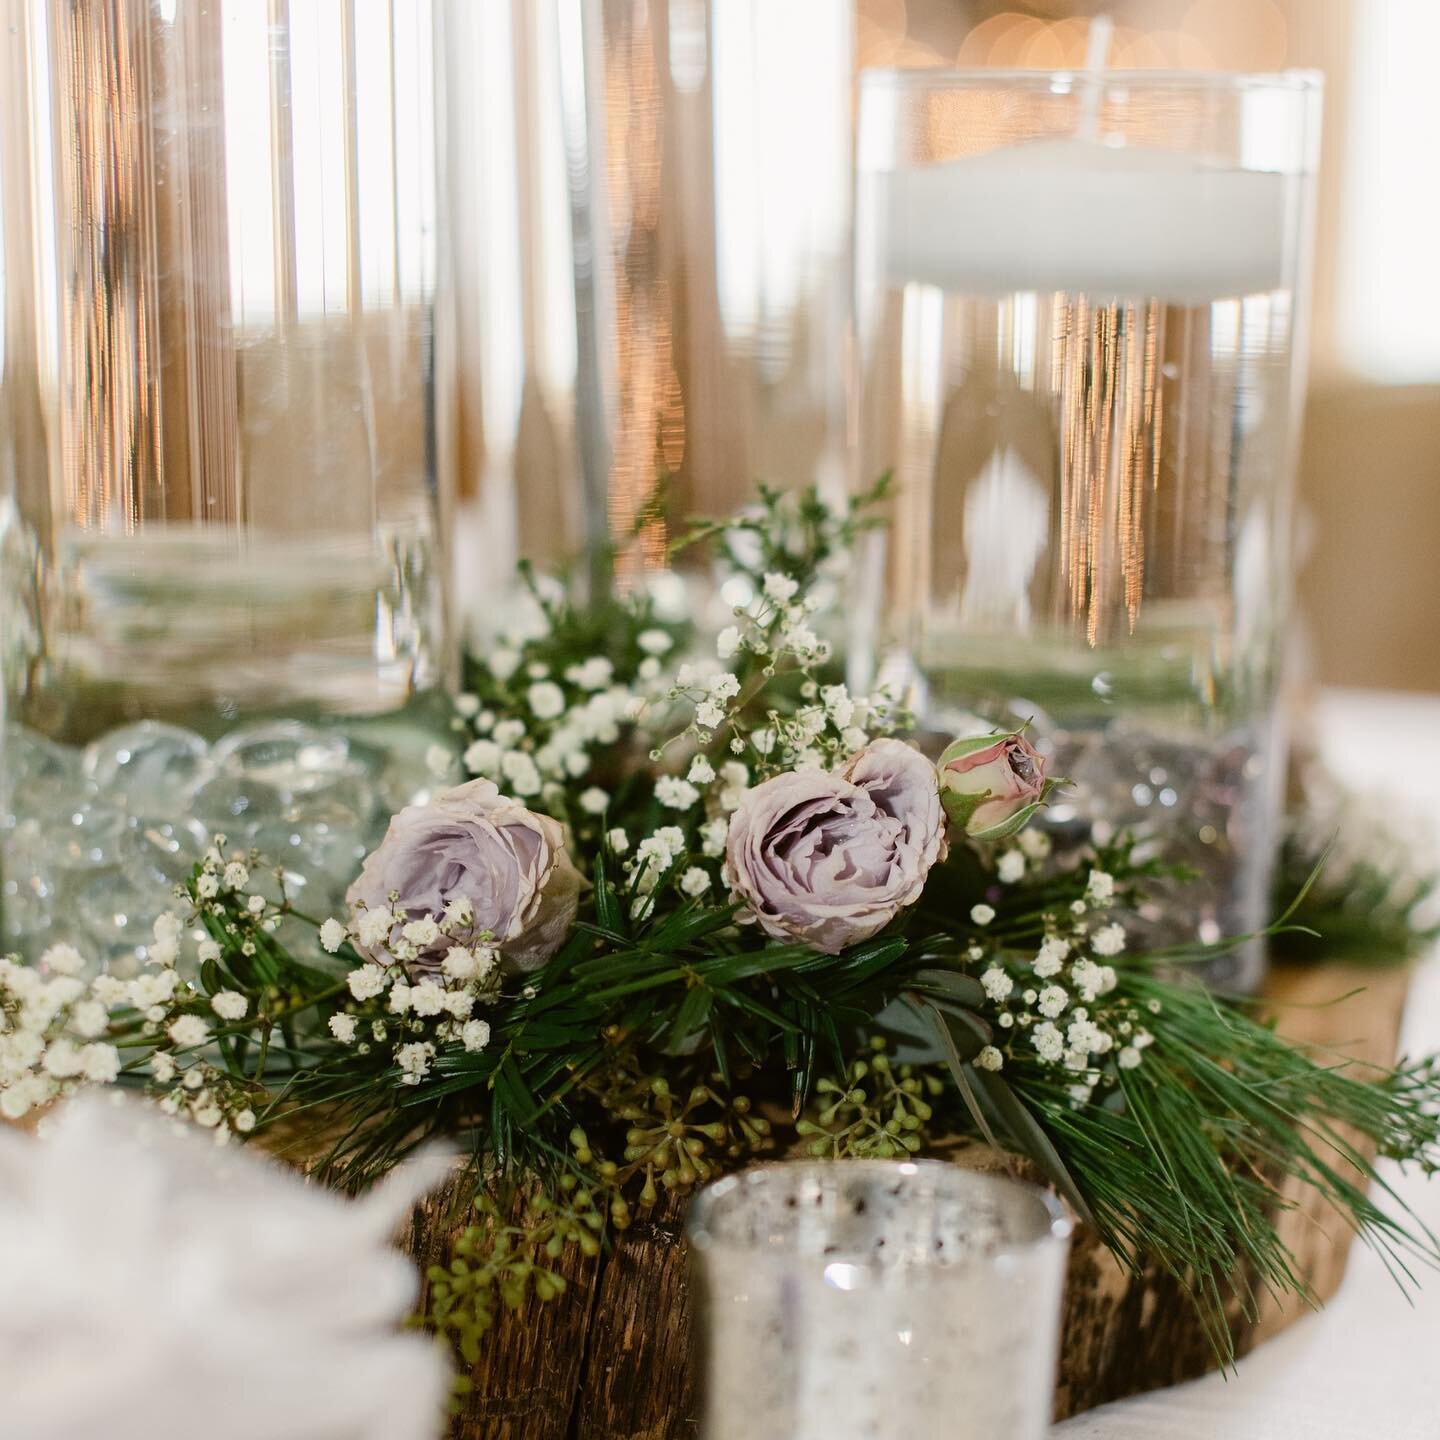 The perfect cocktail hour has 3 things:

1) great music
2) delicious appetizers
3) a beautiful centerpiece ✨

📷: @gkiaphoto